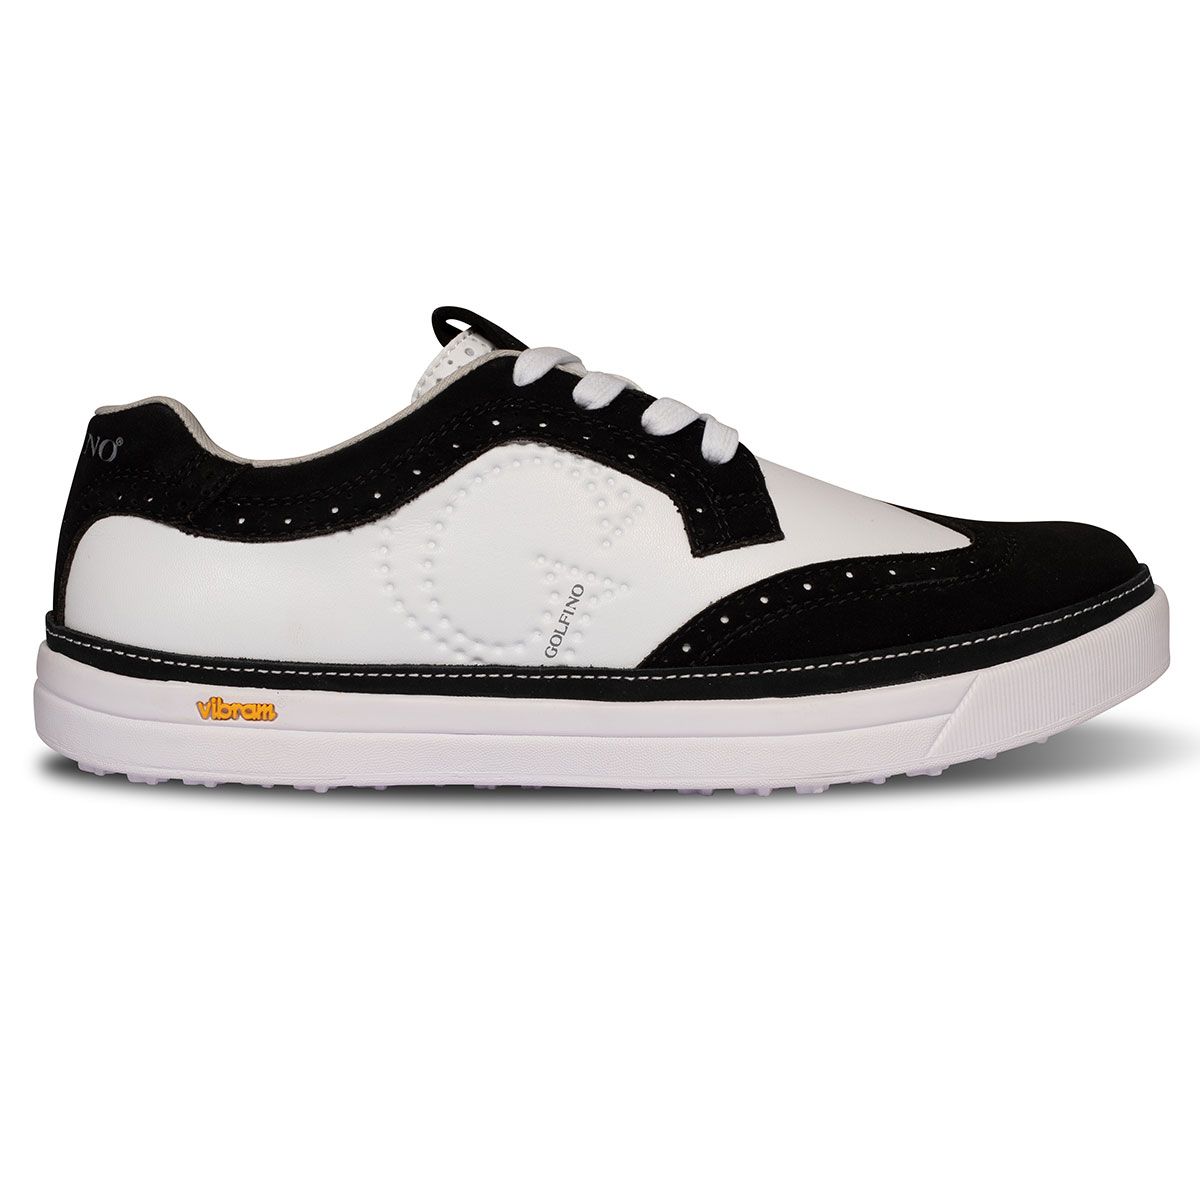 Ladies' golf shoes Brogue style